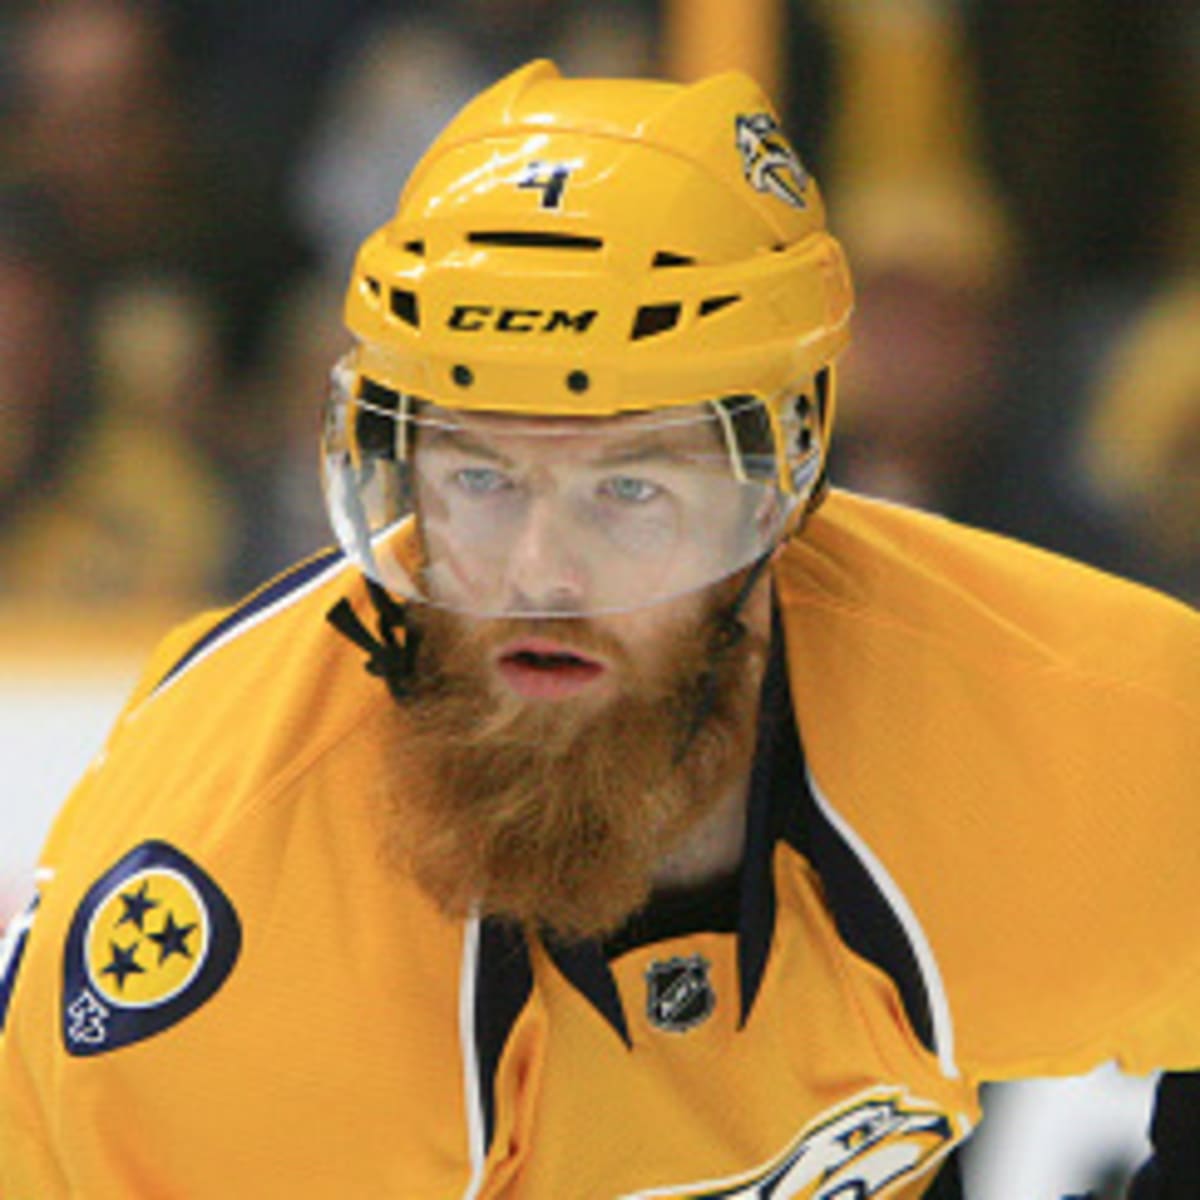 NHL Playoff Beard Watch: Blood, Sweat and Beards of unsung unshaven heroes